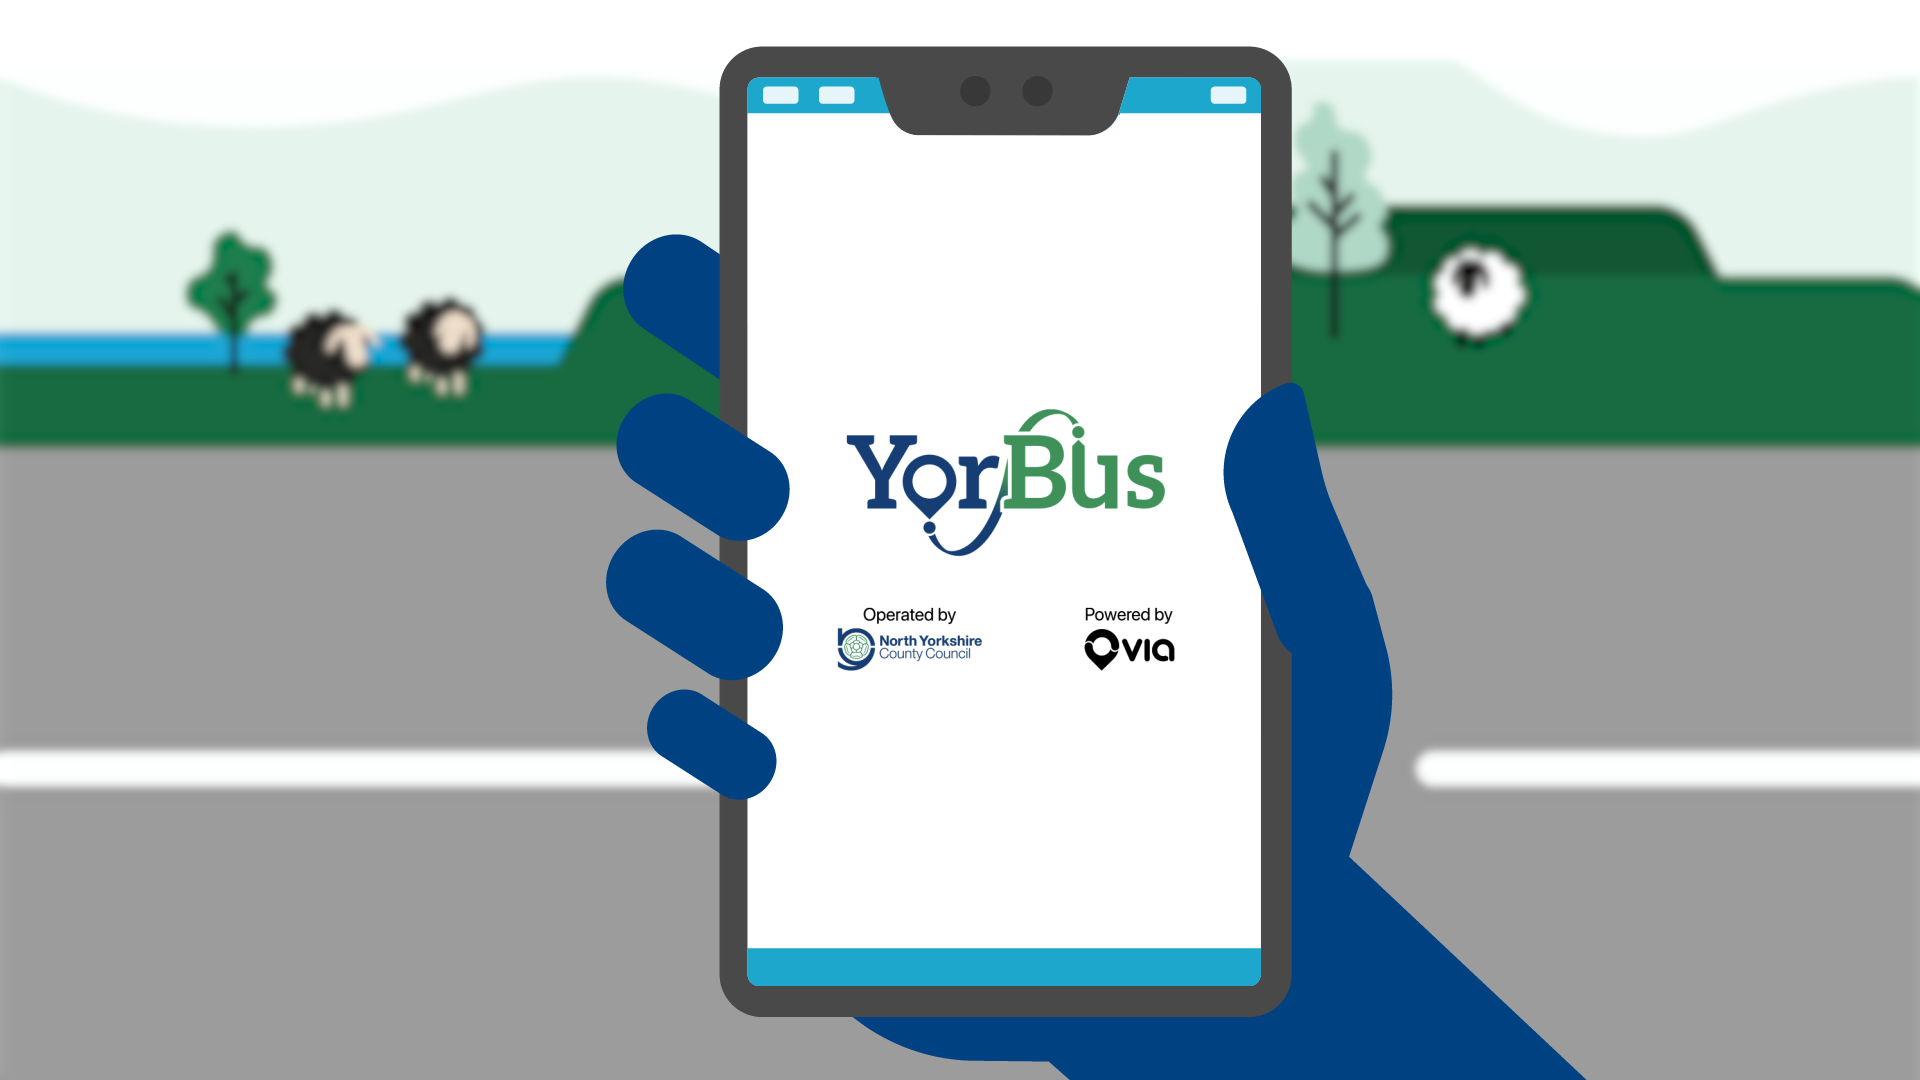 Still image from the animation showing the YorBus app running on a handheld device